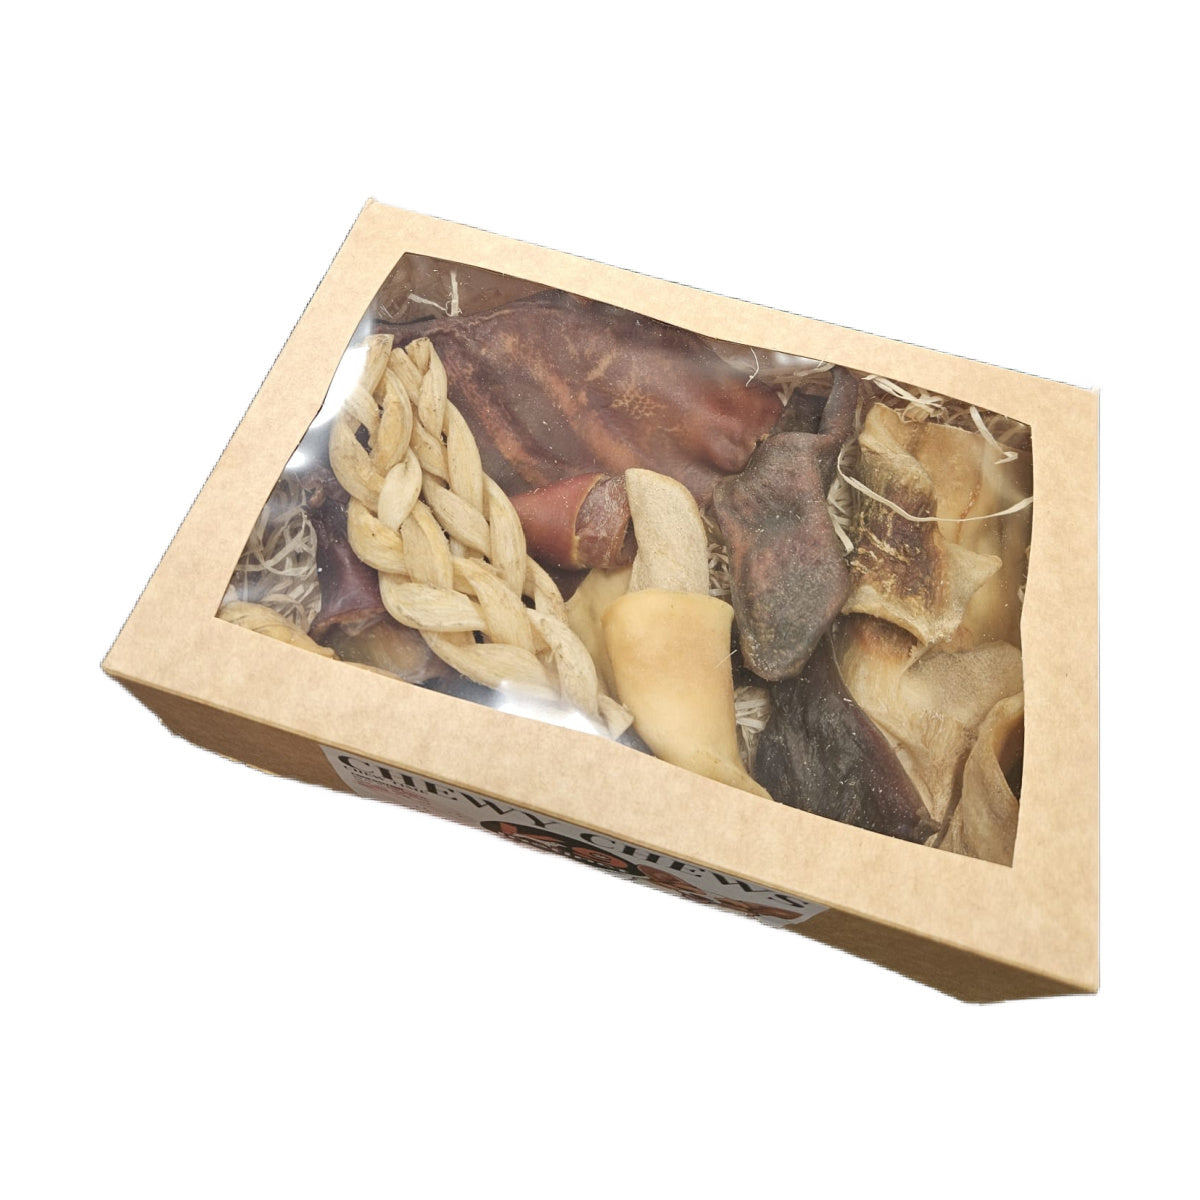 Natural Chews variety box for dogs in Wiltshire